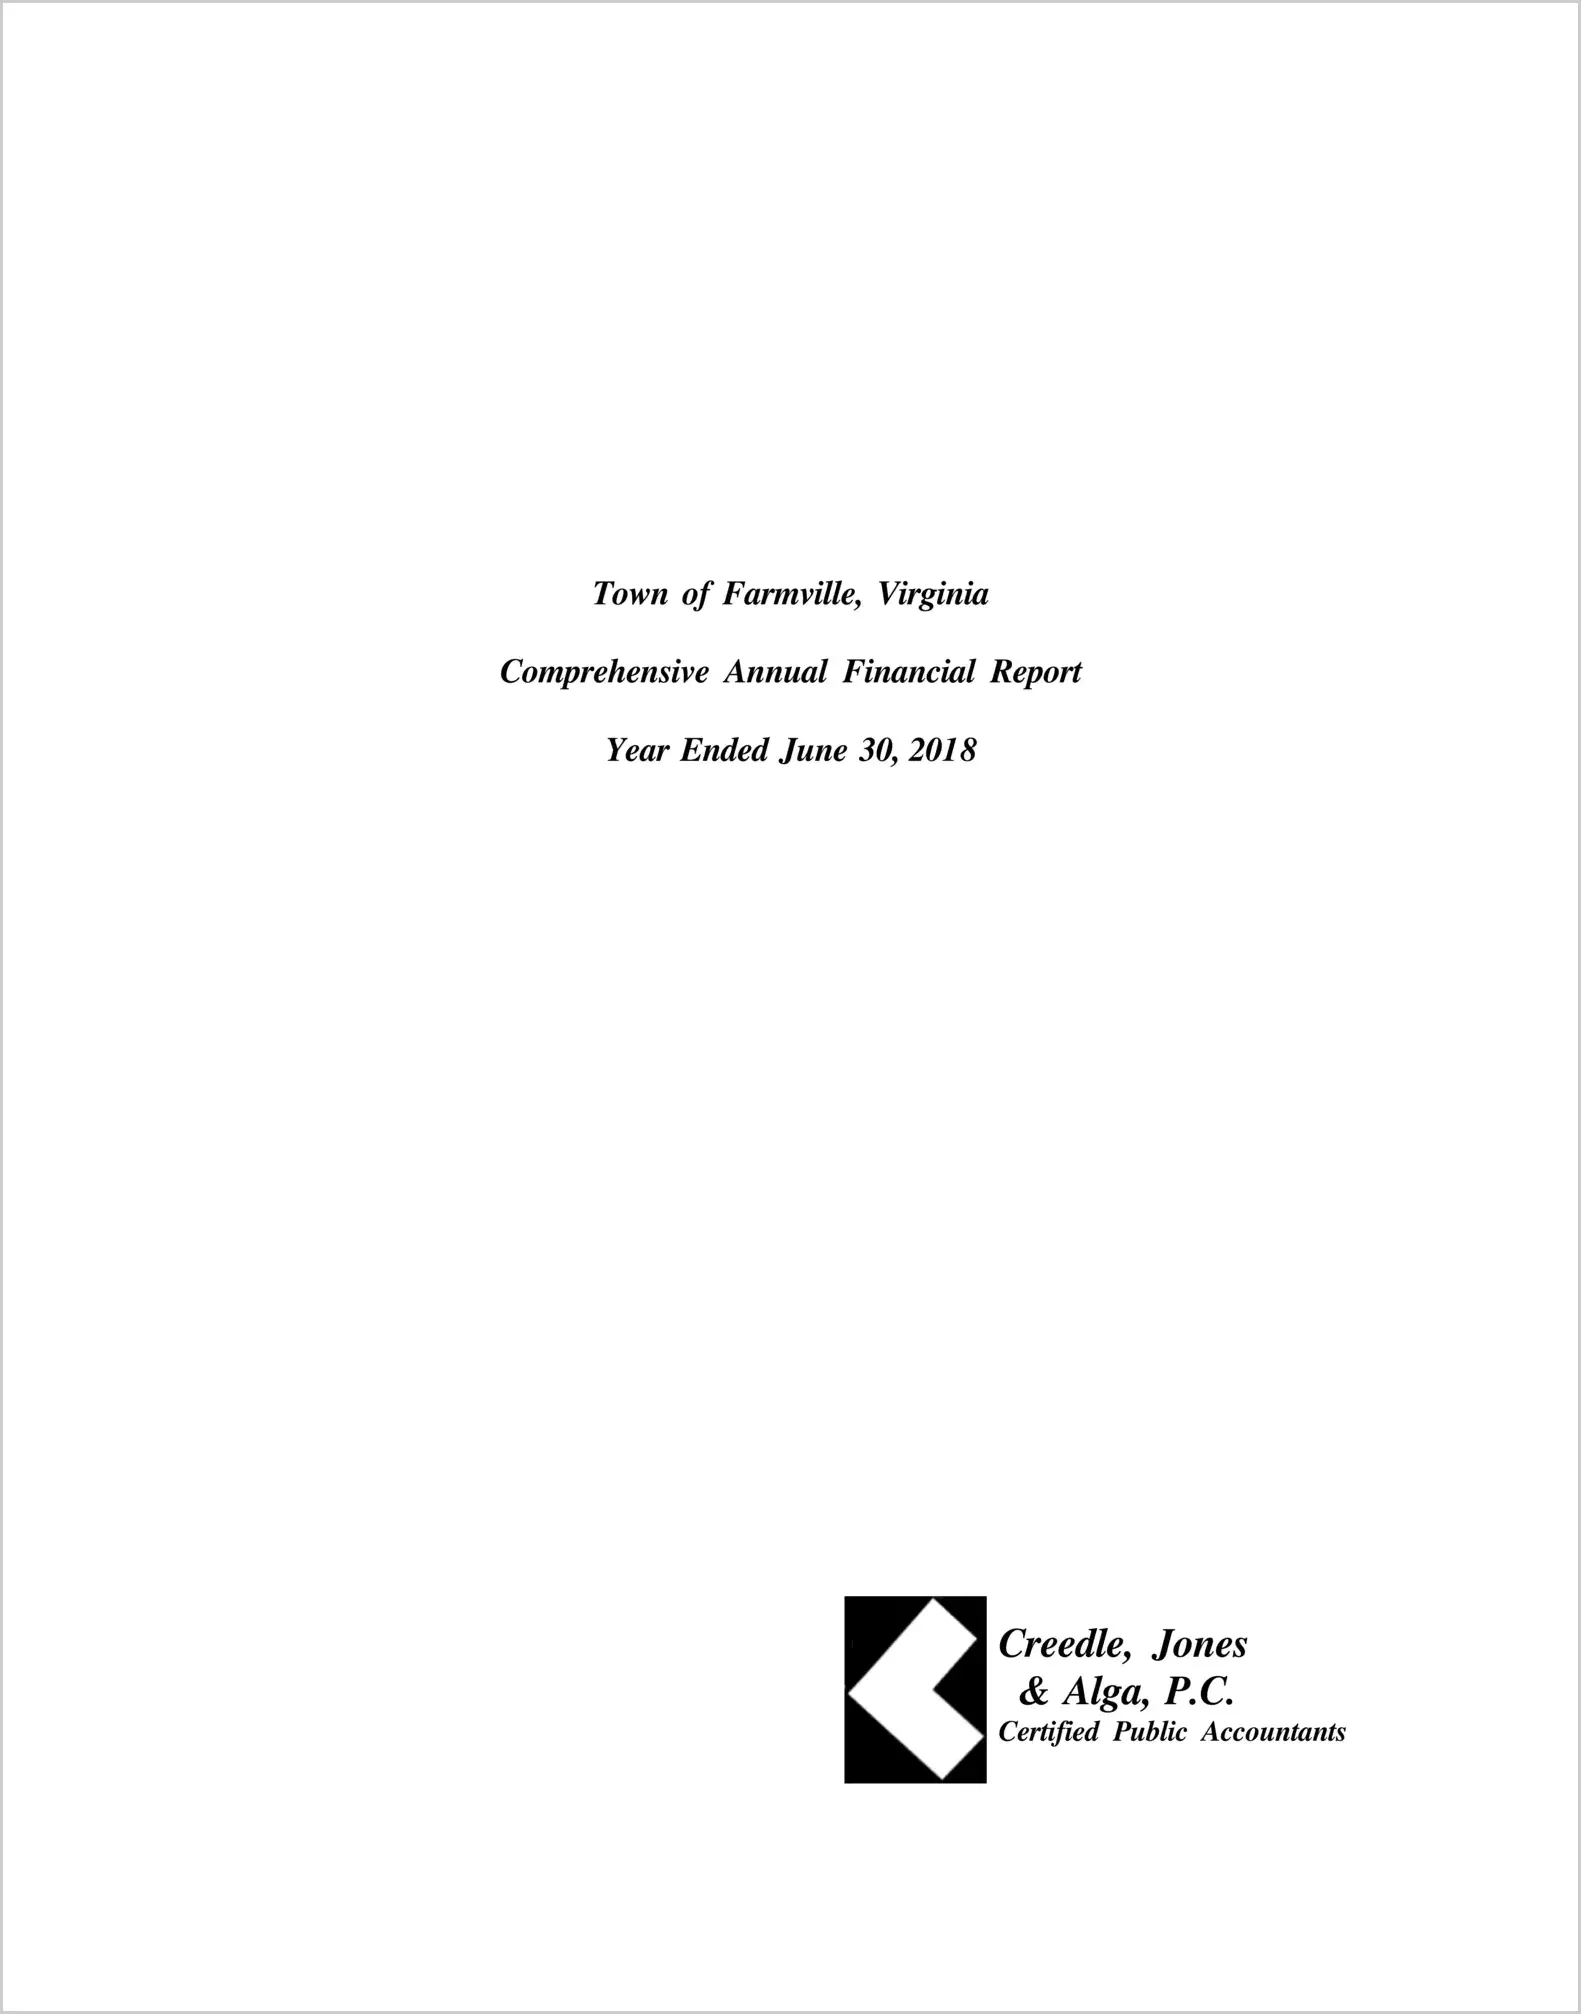 2018 Annual Financial Report for Town of Farmville